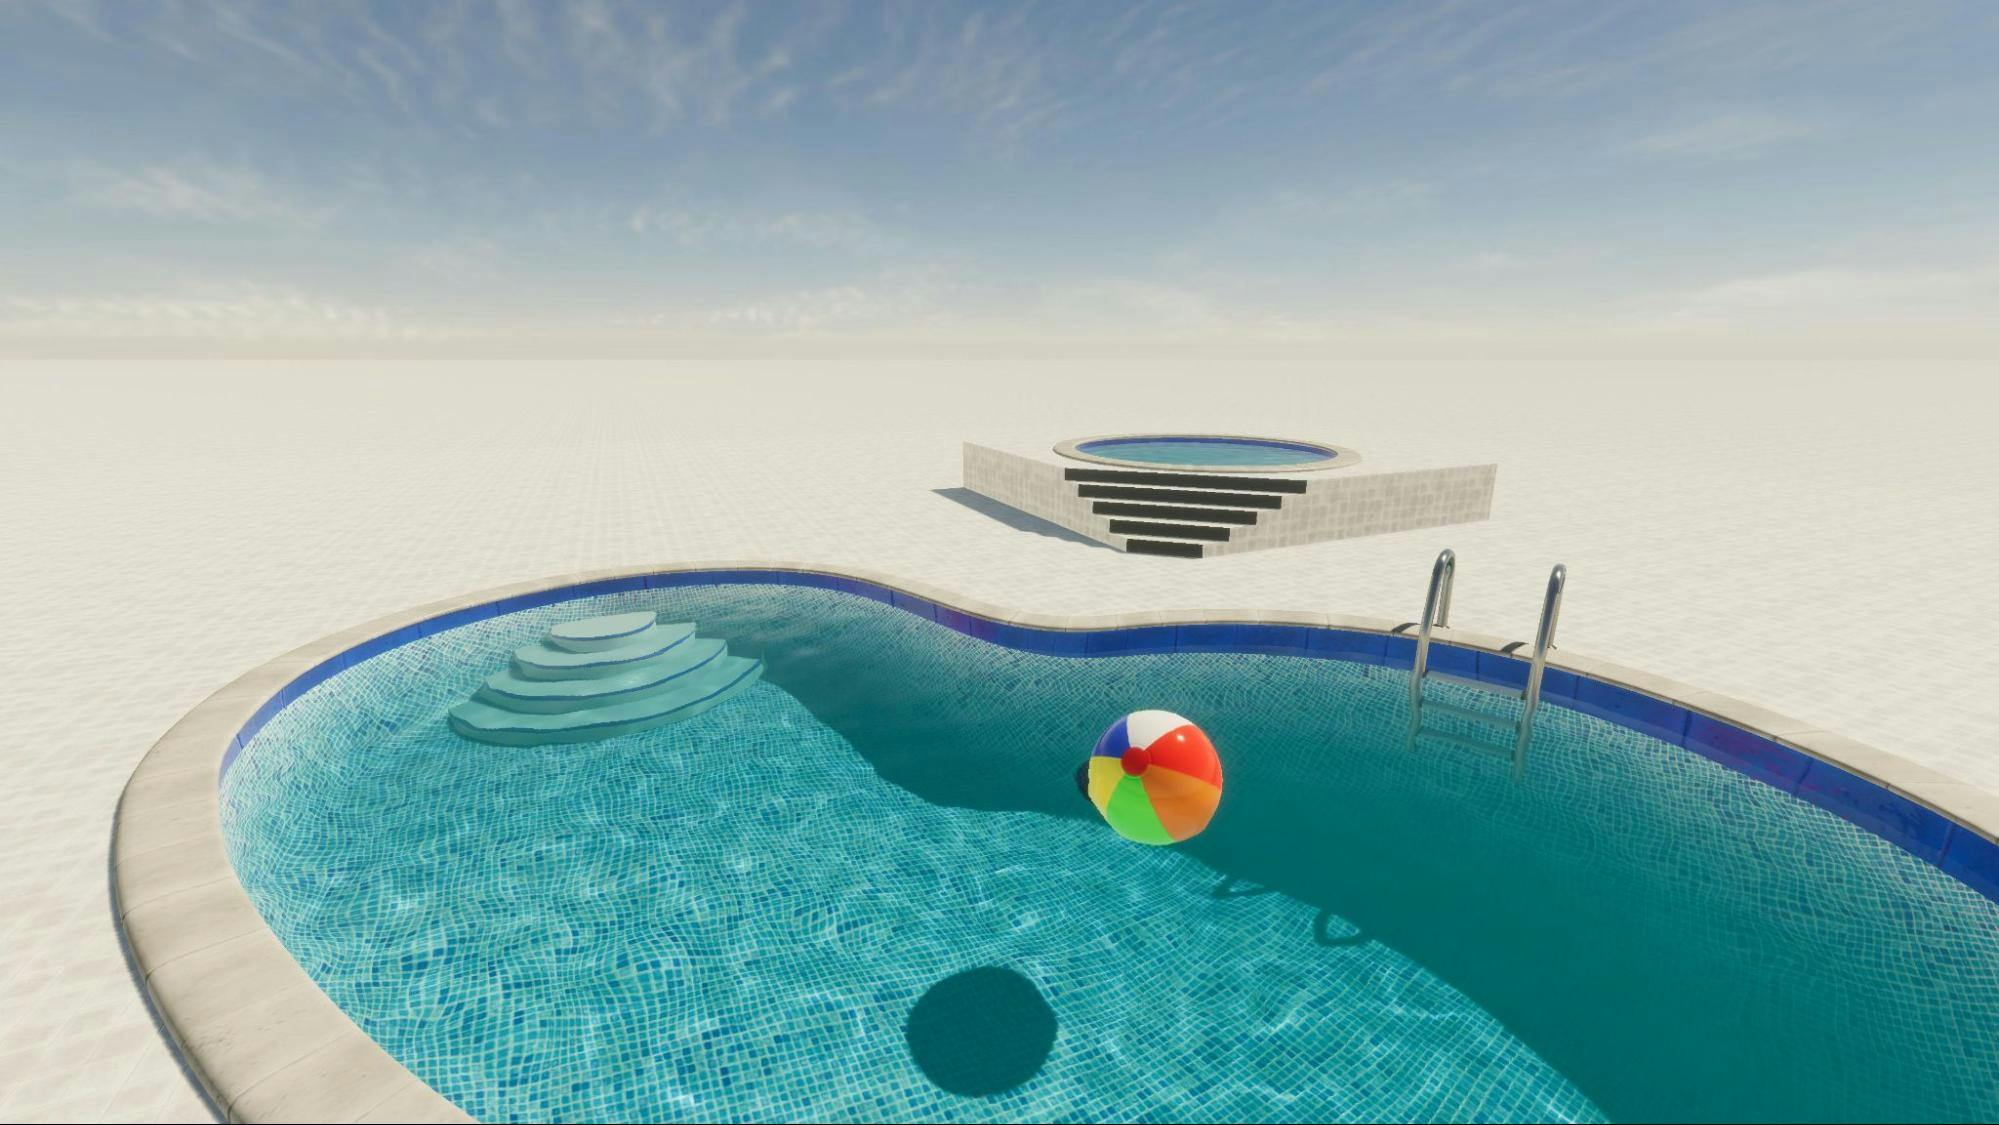 Unity High Definition Render Pipeline water system swimming pool